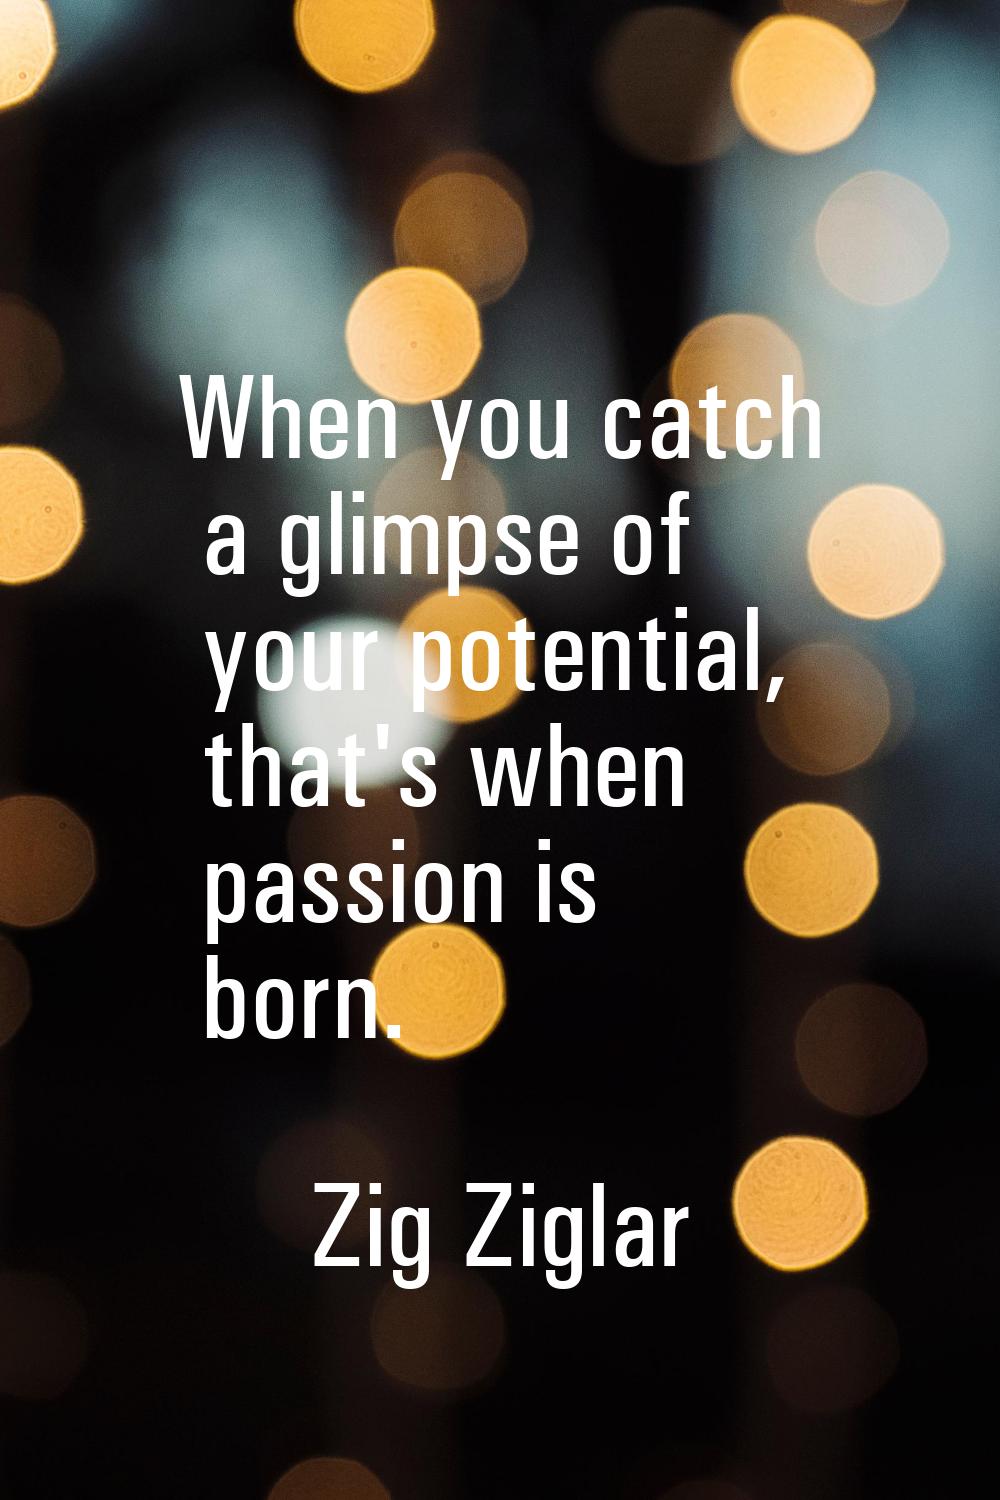 When you catch a glimpse of your potential, that's when passion is born.